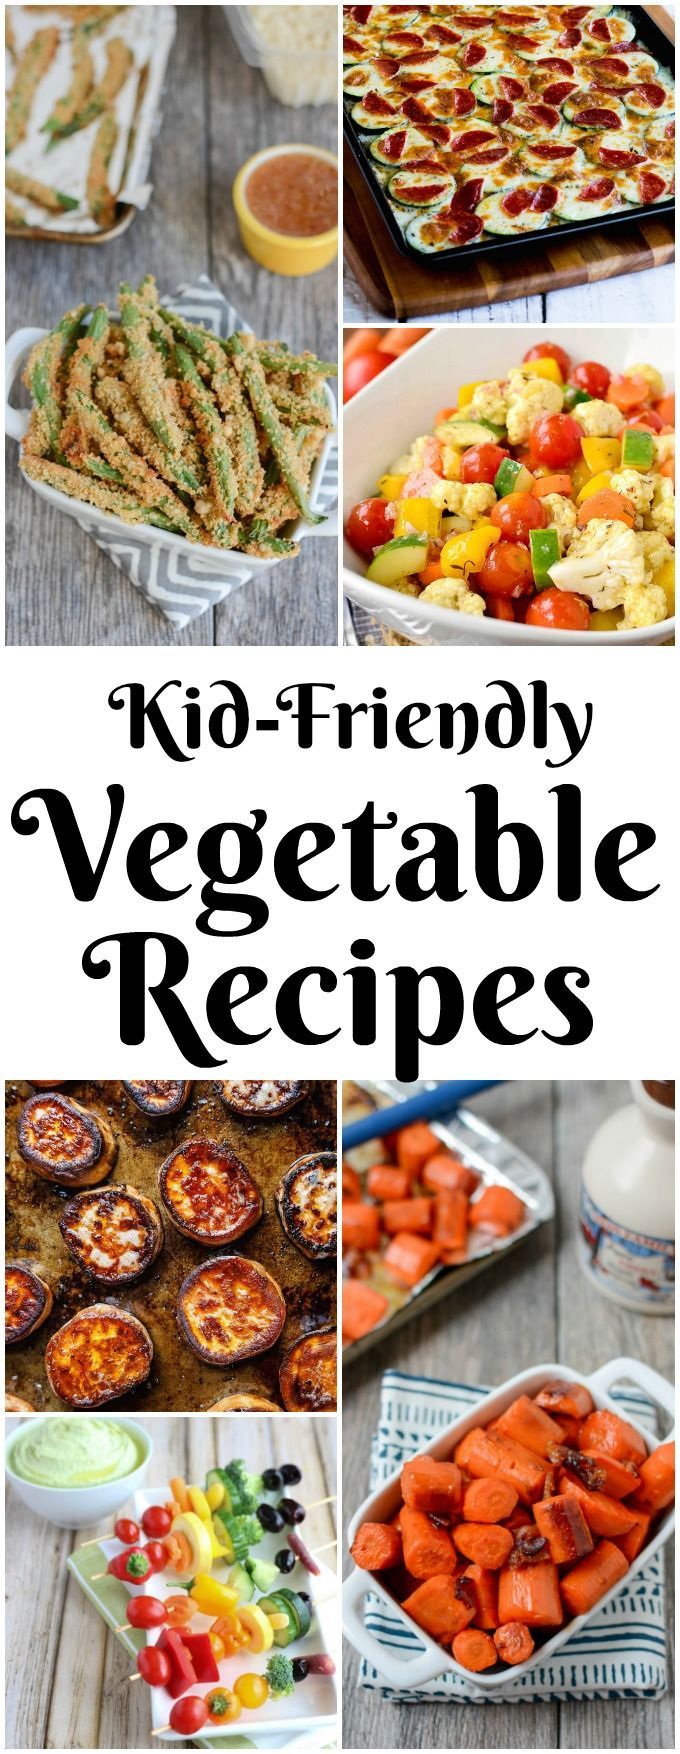 10 Kid-Friendly Vegetable Recipes -   22 vegetable recipes for picky eaters
 ideas